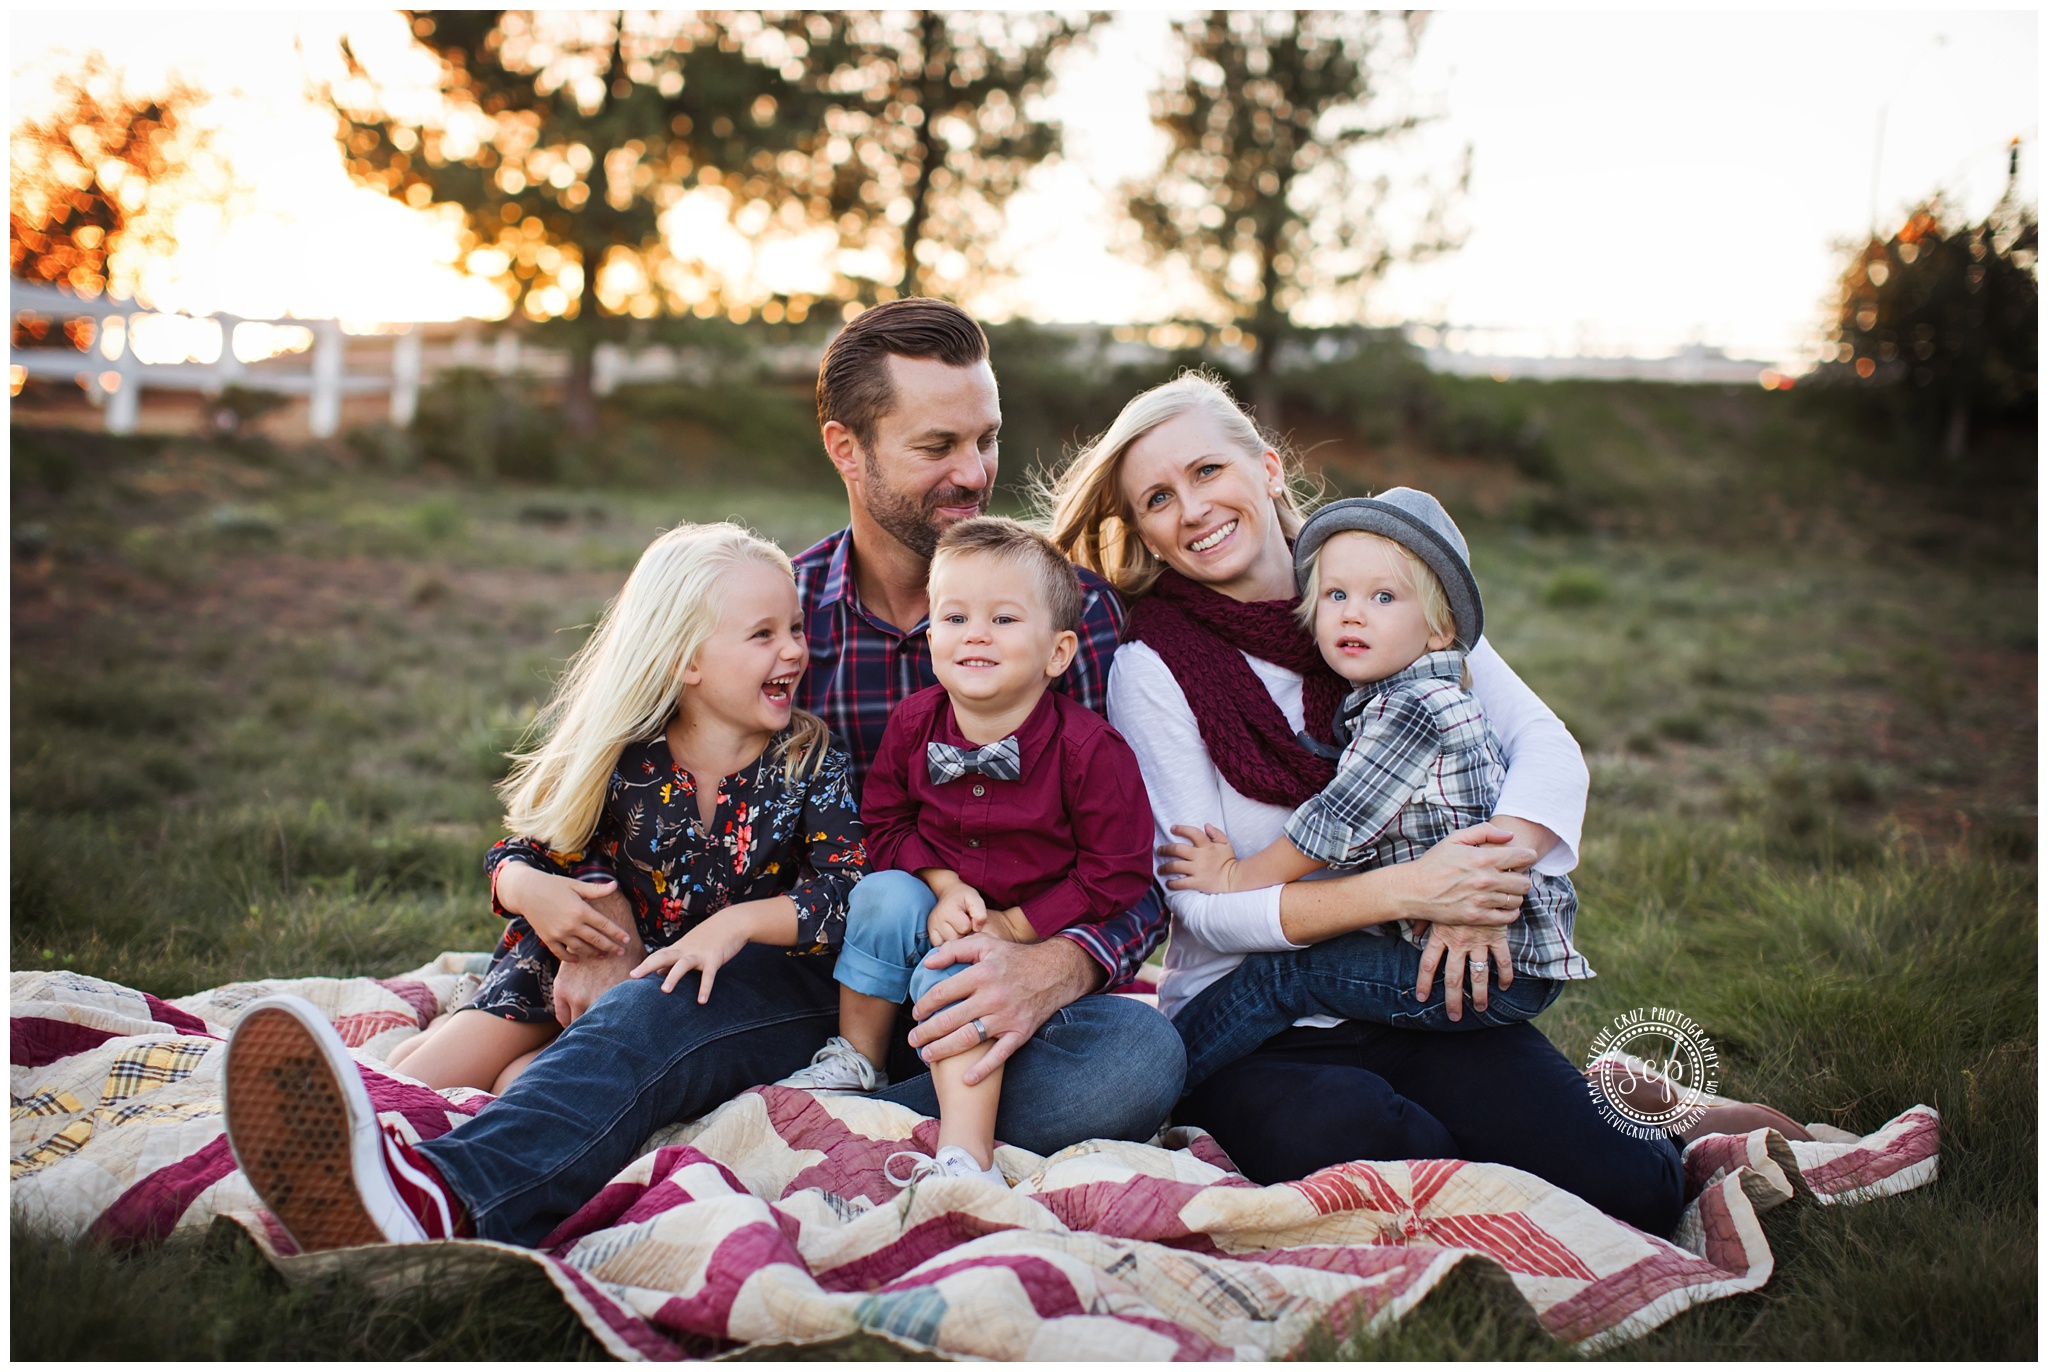 Outdoor family photo sessions are so fun and casual. These are family pictures to cherish for many years to come